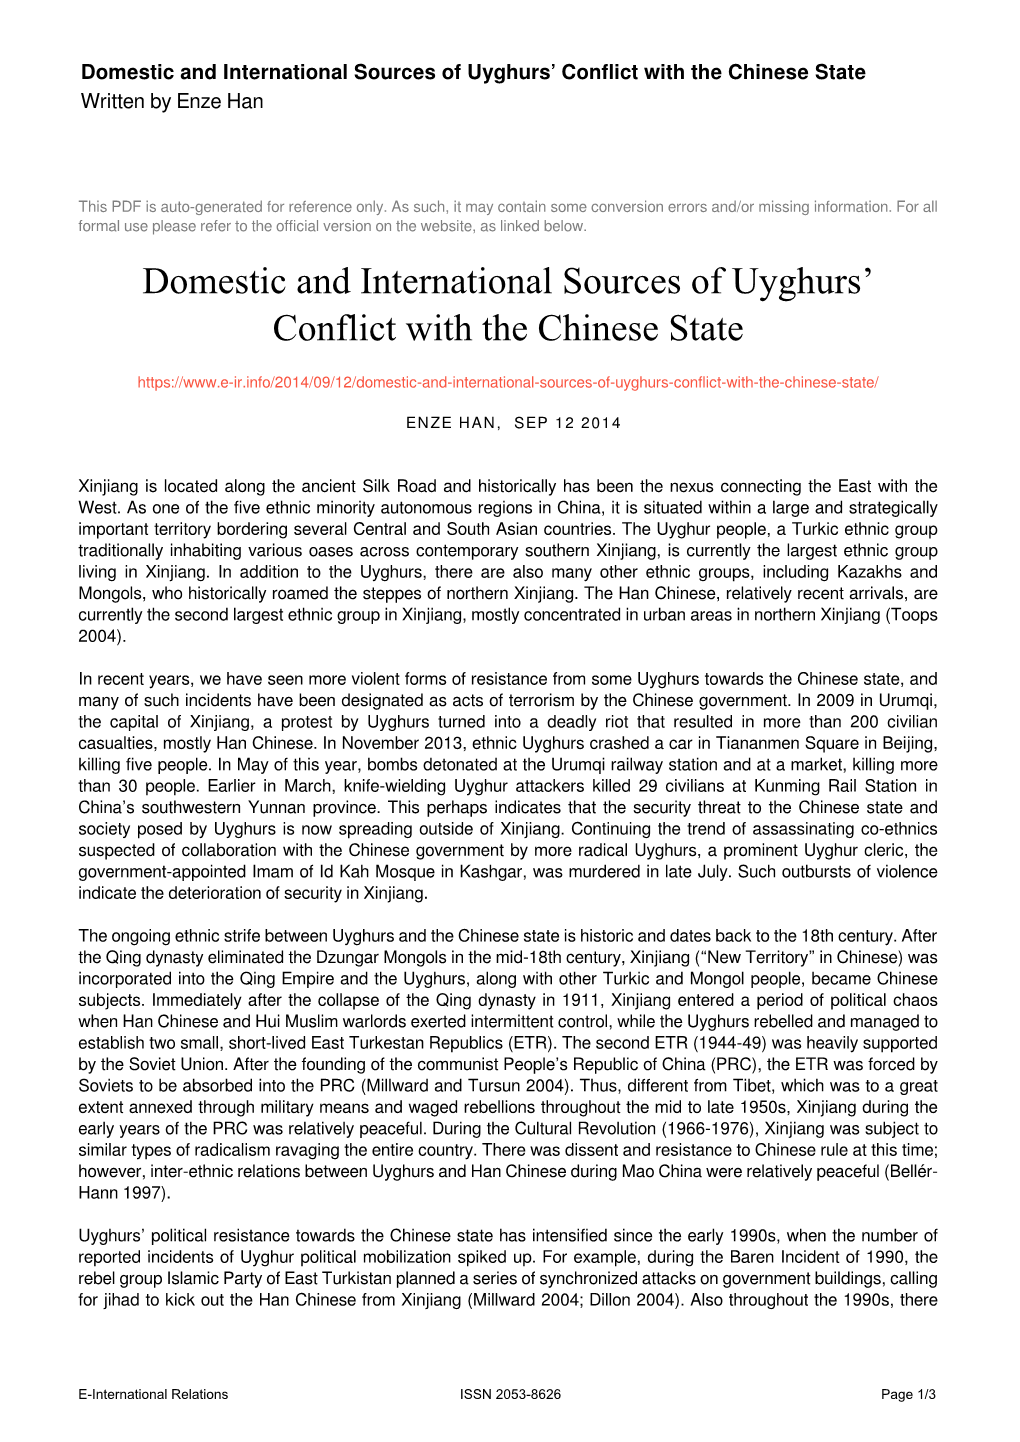 Domestic and International Sources of Uyghurs' Conflict with the Chinese State